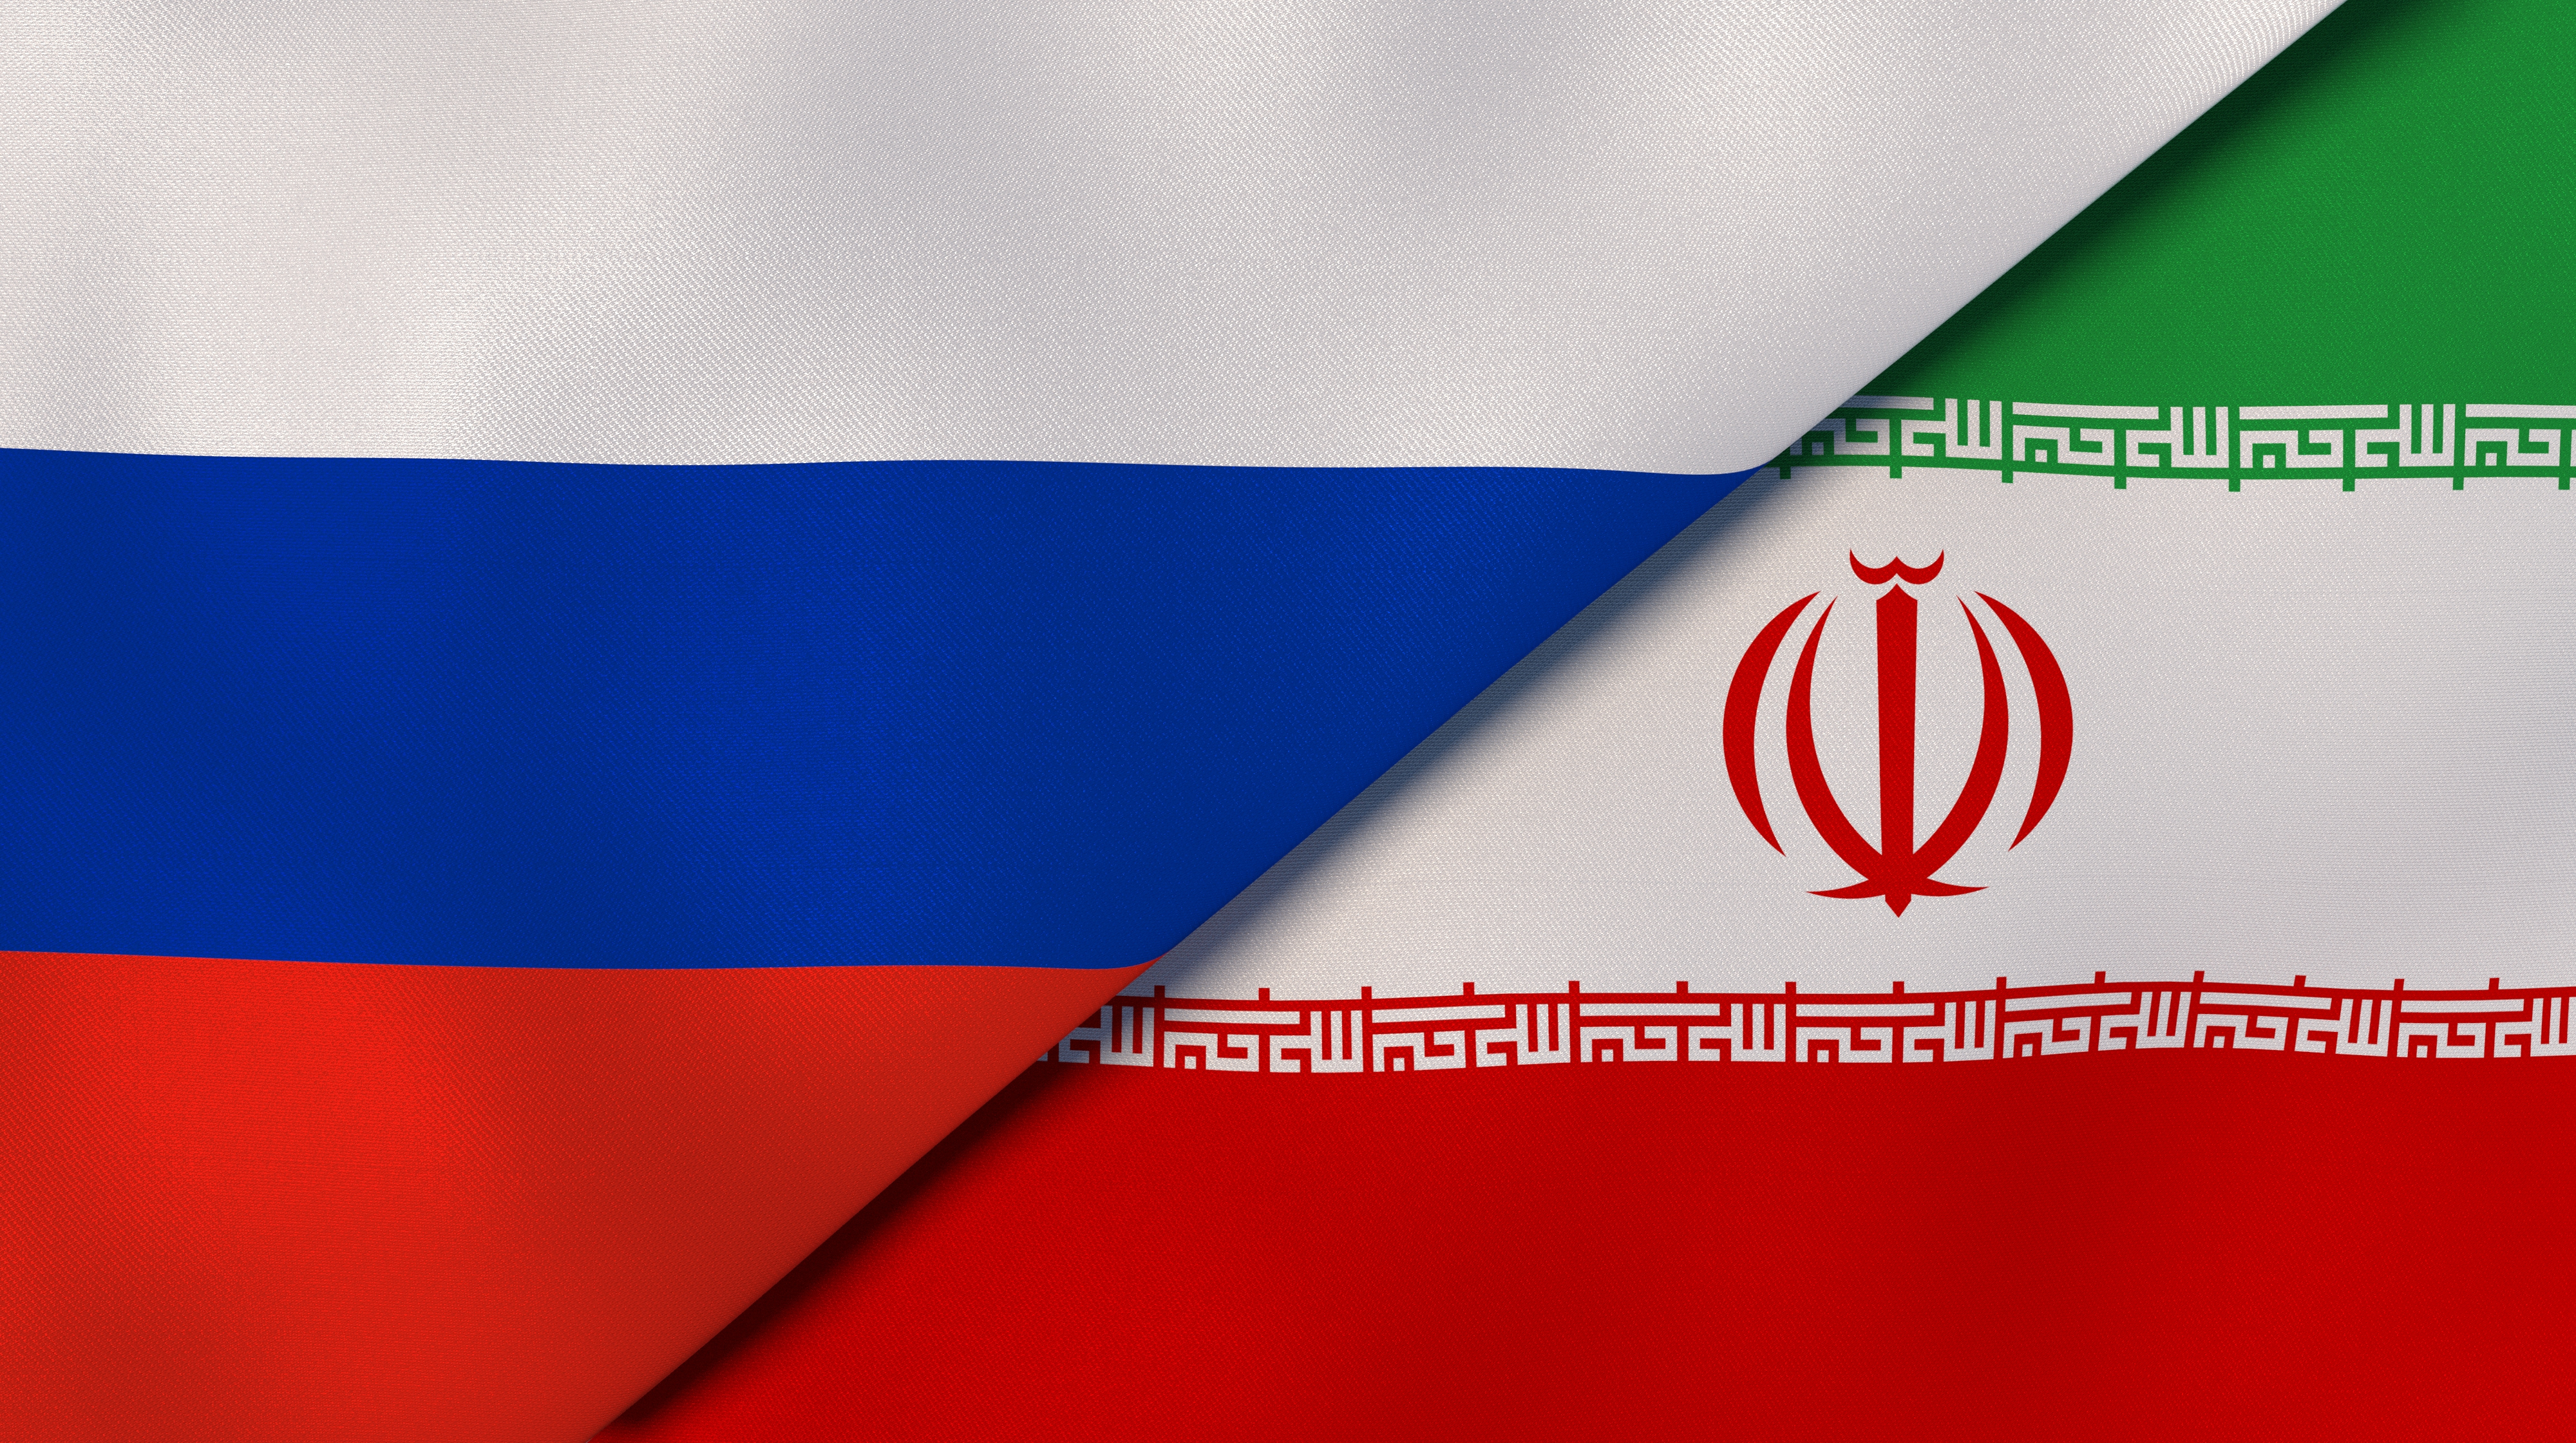 Iranians, Russians among 7 sanctioned by Canada over rights violations